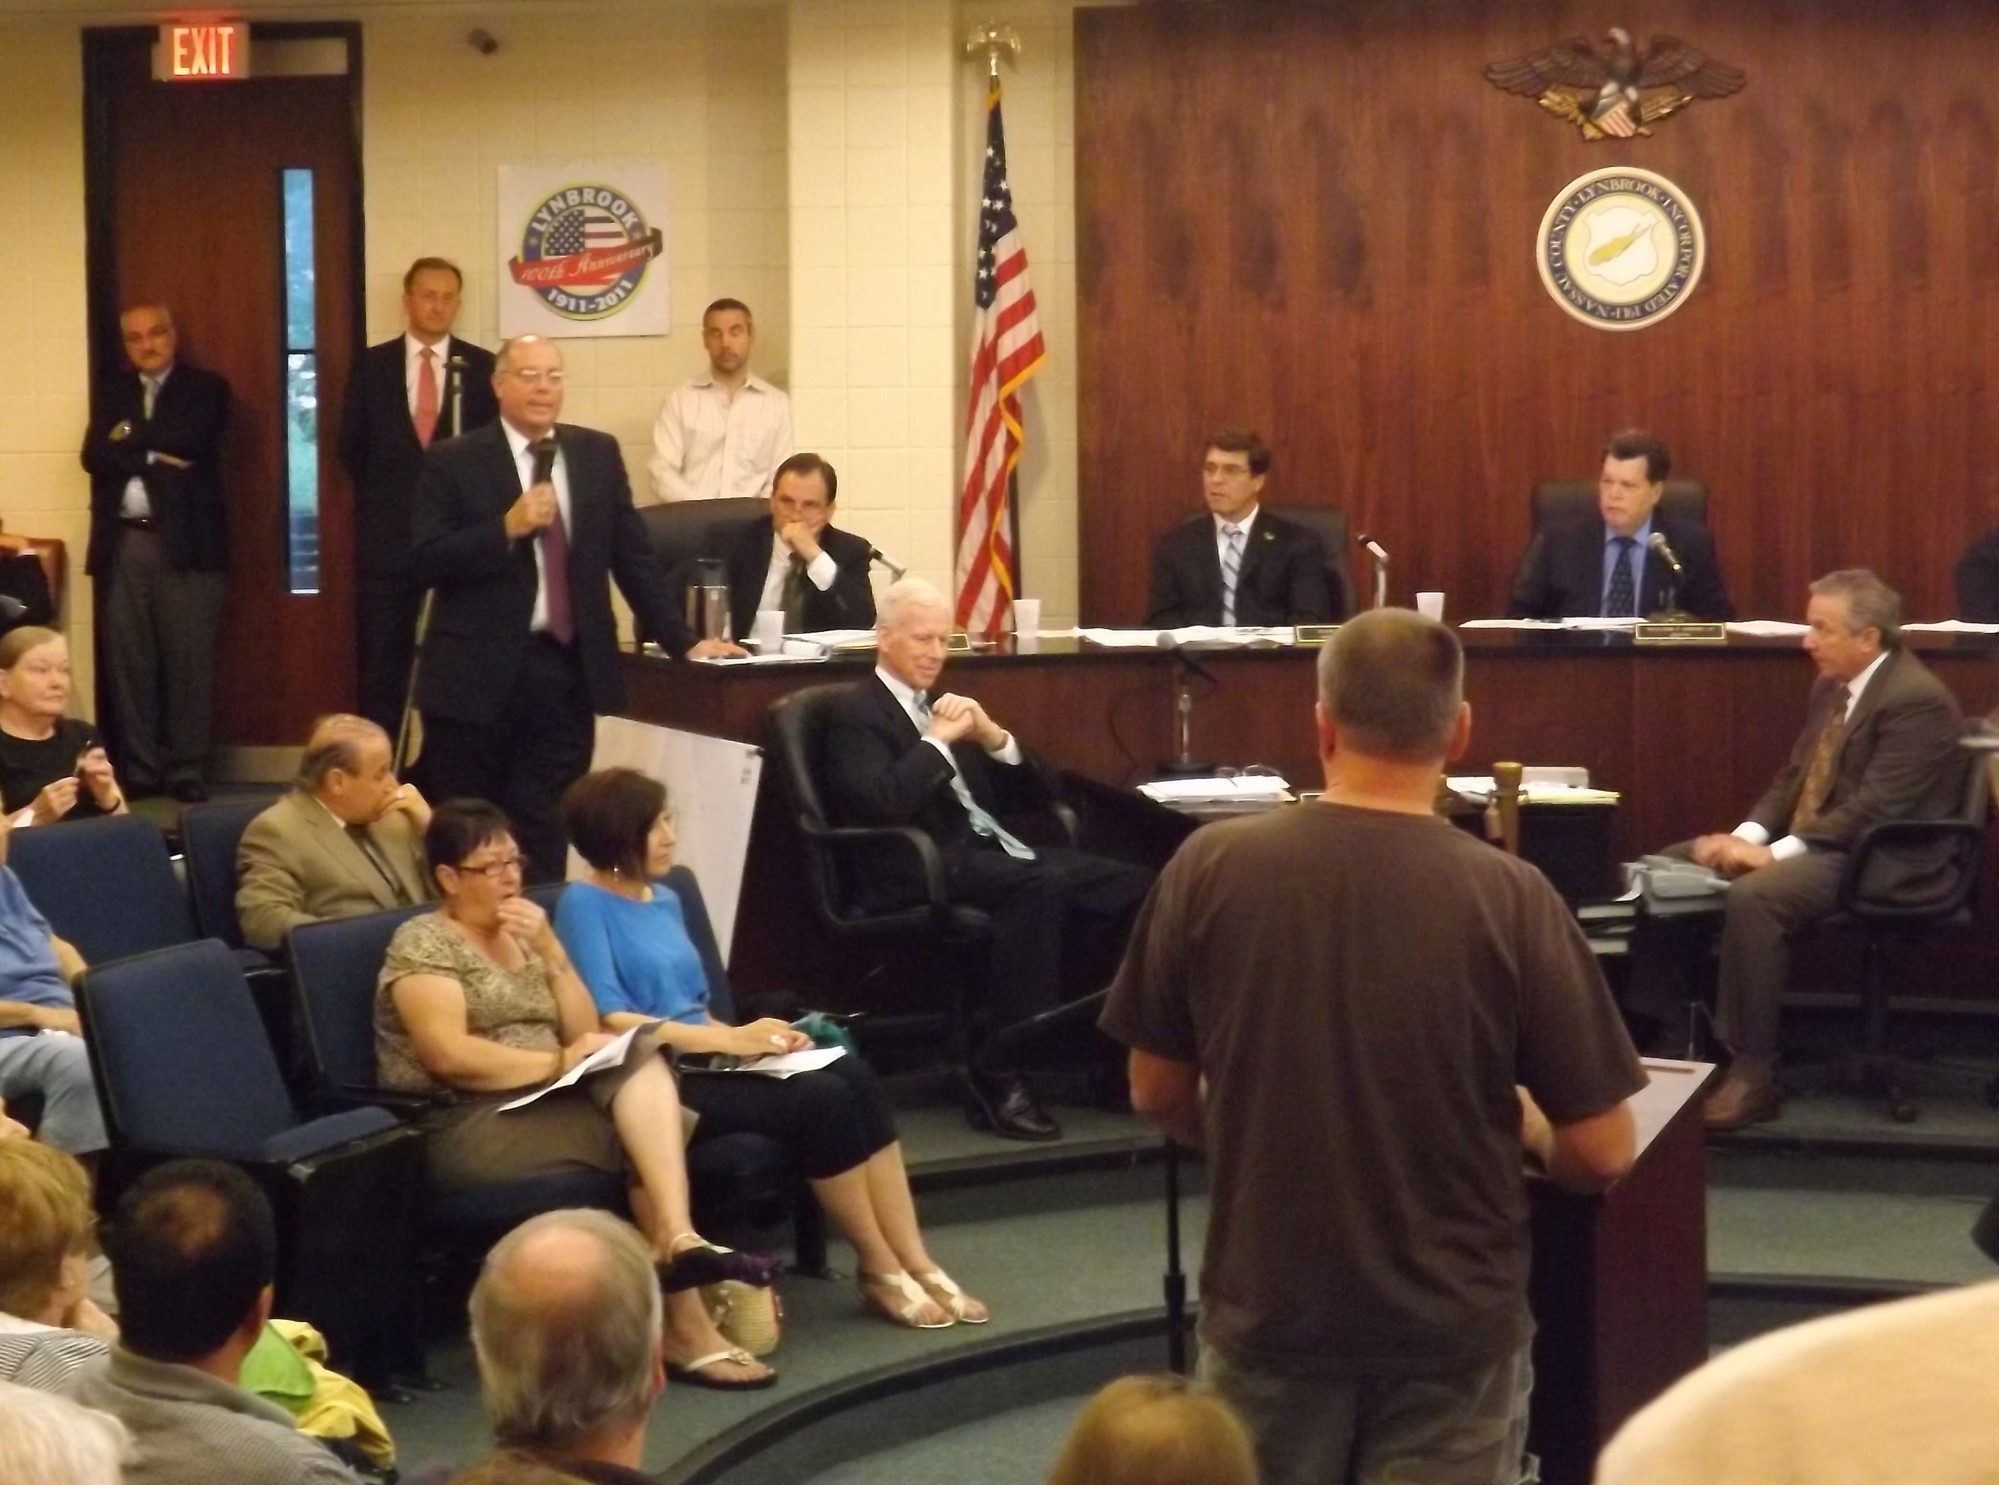 More than 30 residents asked questions and made comments during a July 2 public hearing at Lynbrook Village Hall regarding a Walgreens being built at the corner of Hempstead and Lakeview avenues.